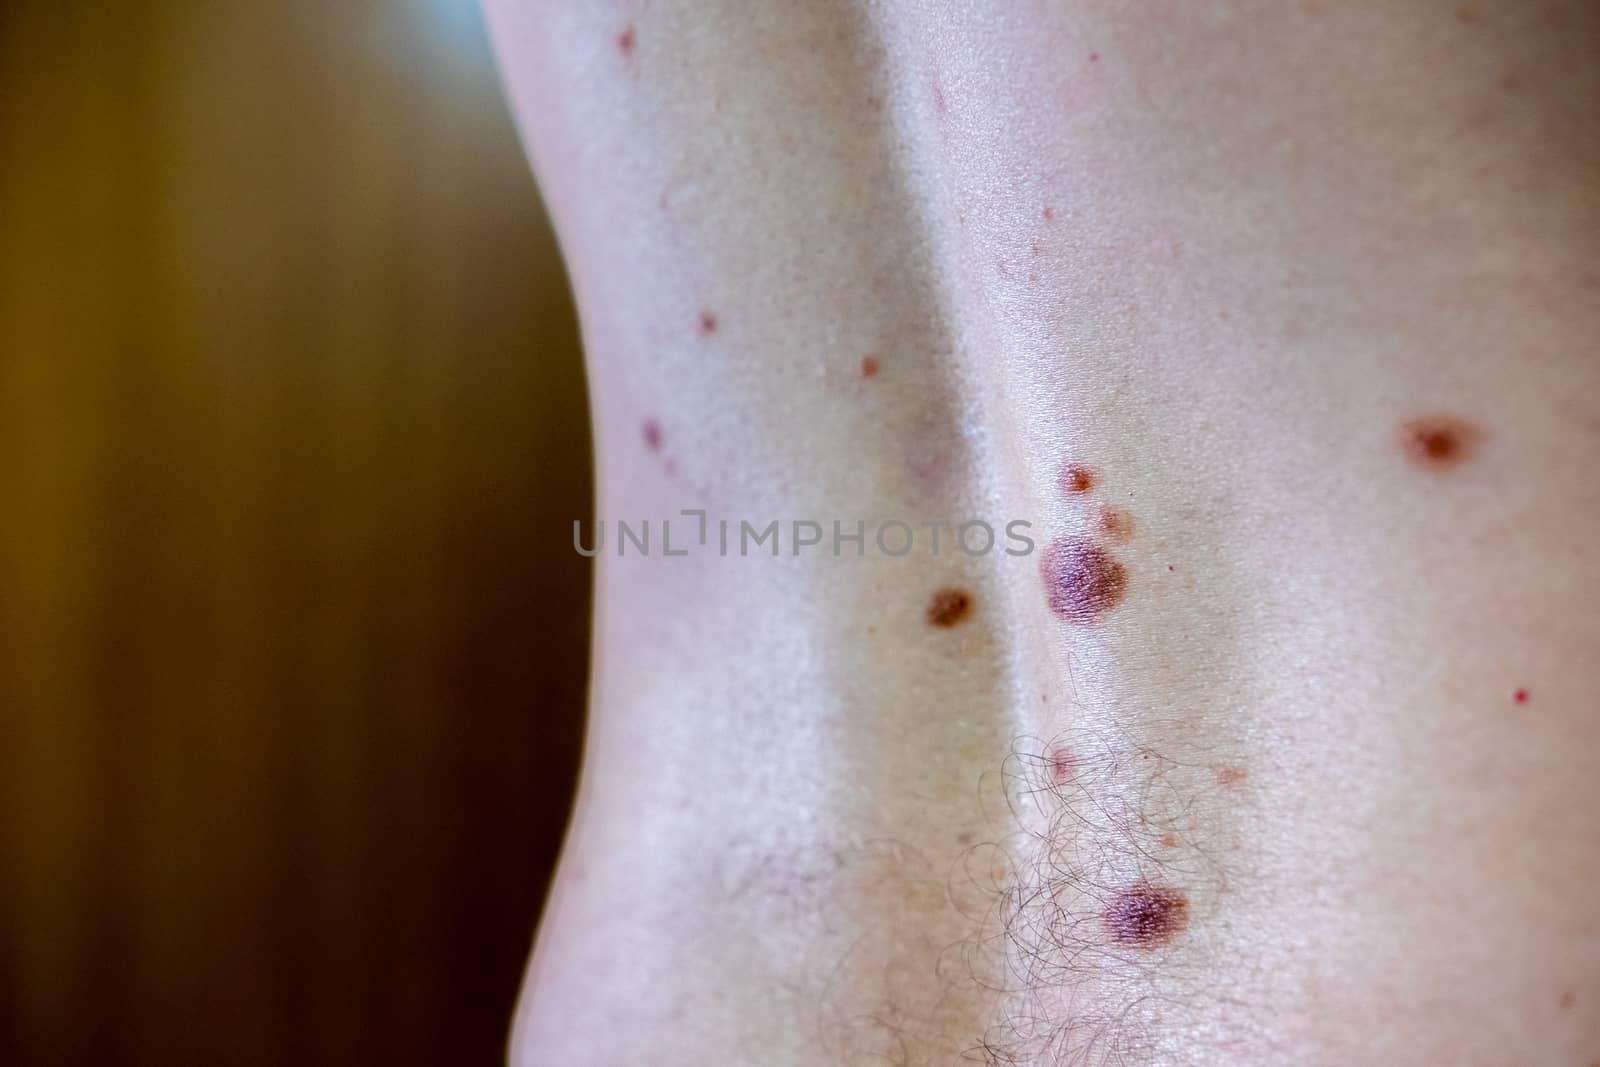 Melanocytic nevus, some of them dyplastic or atypical, on a caucasian man of 36 years old by mikelju